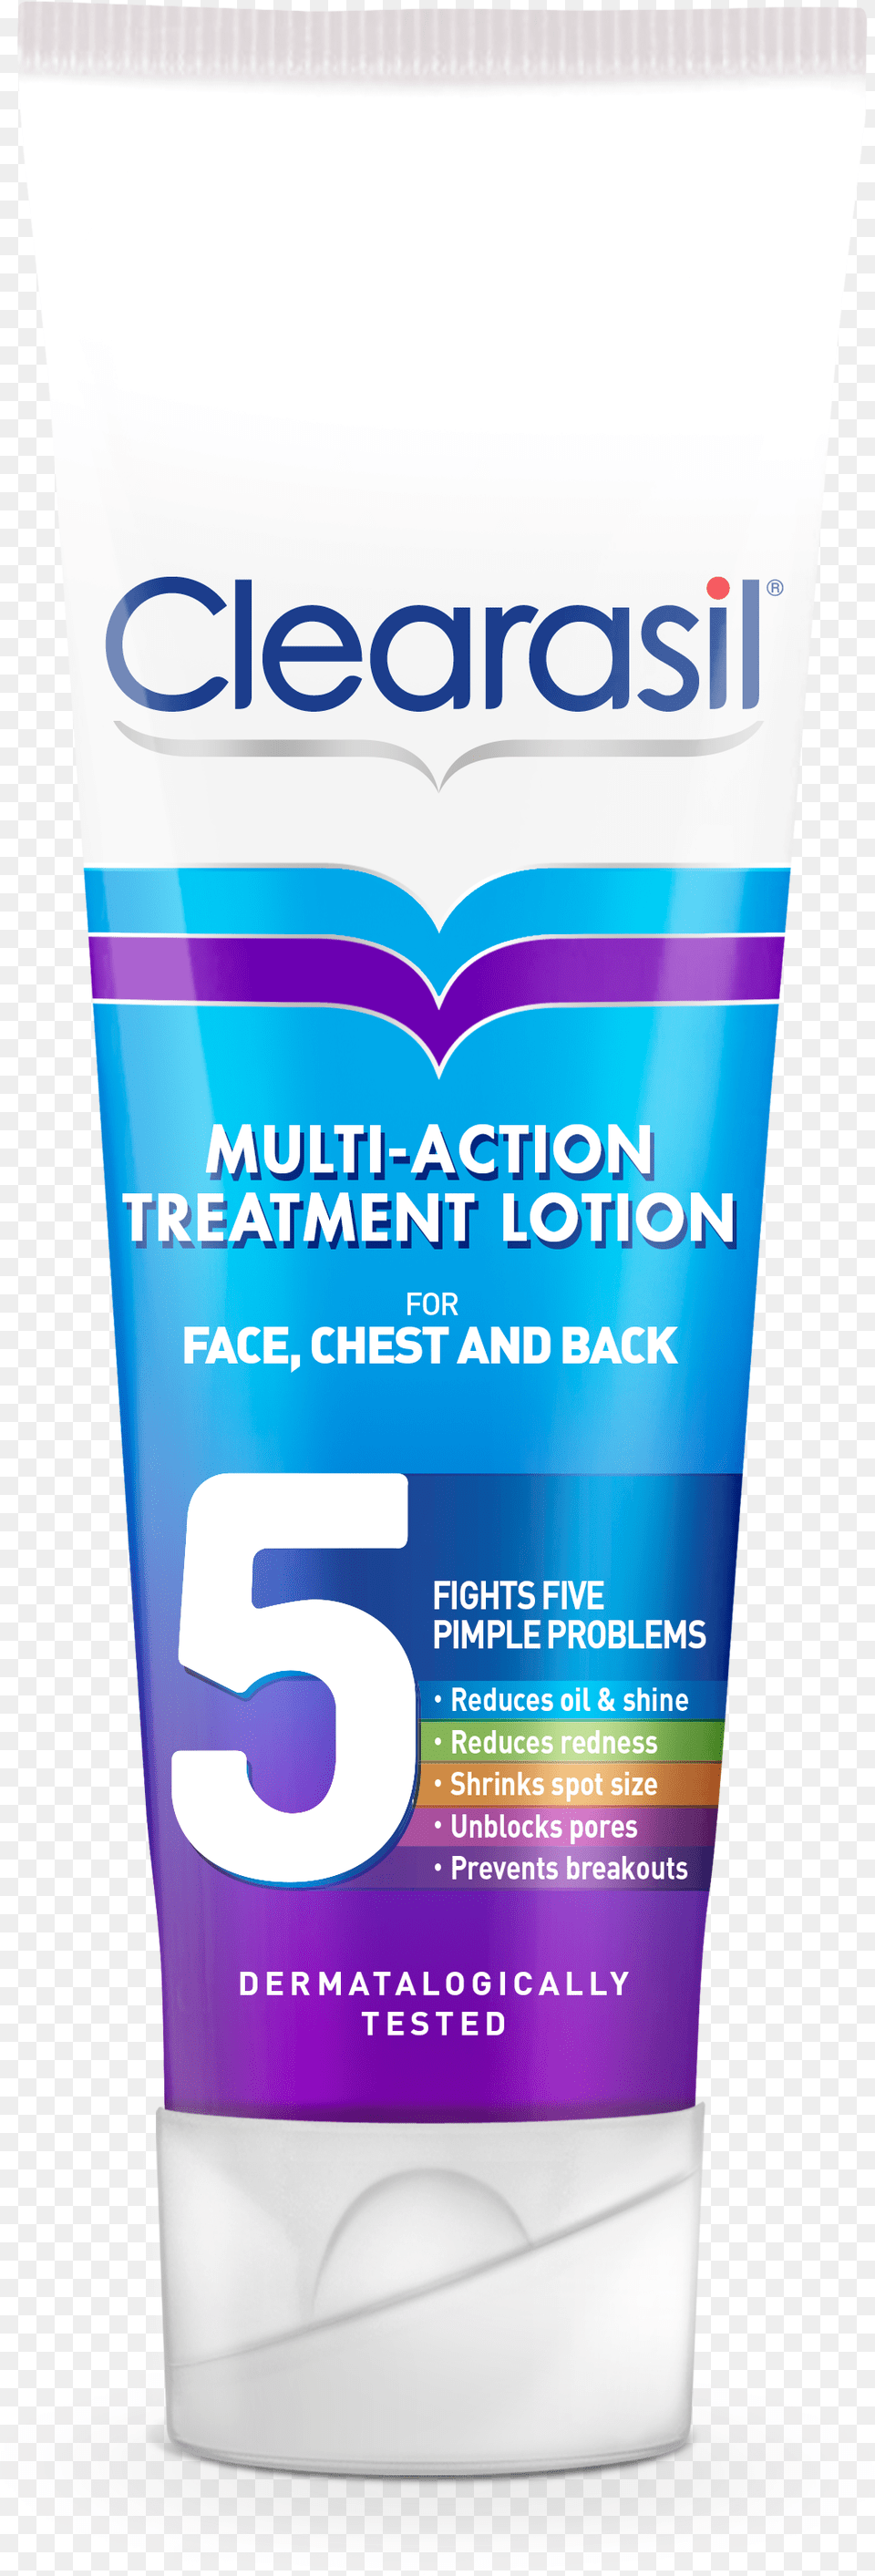 Clearasil Multi Action 5 In 1 Lotion Clearasil Ultra 5 In 1 Exfoliating Scrub, Bottle, Cosmetics, Sunscreen, Can Free Png